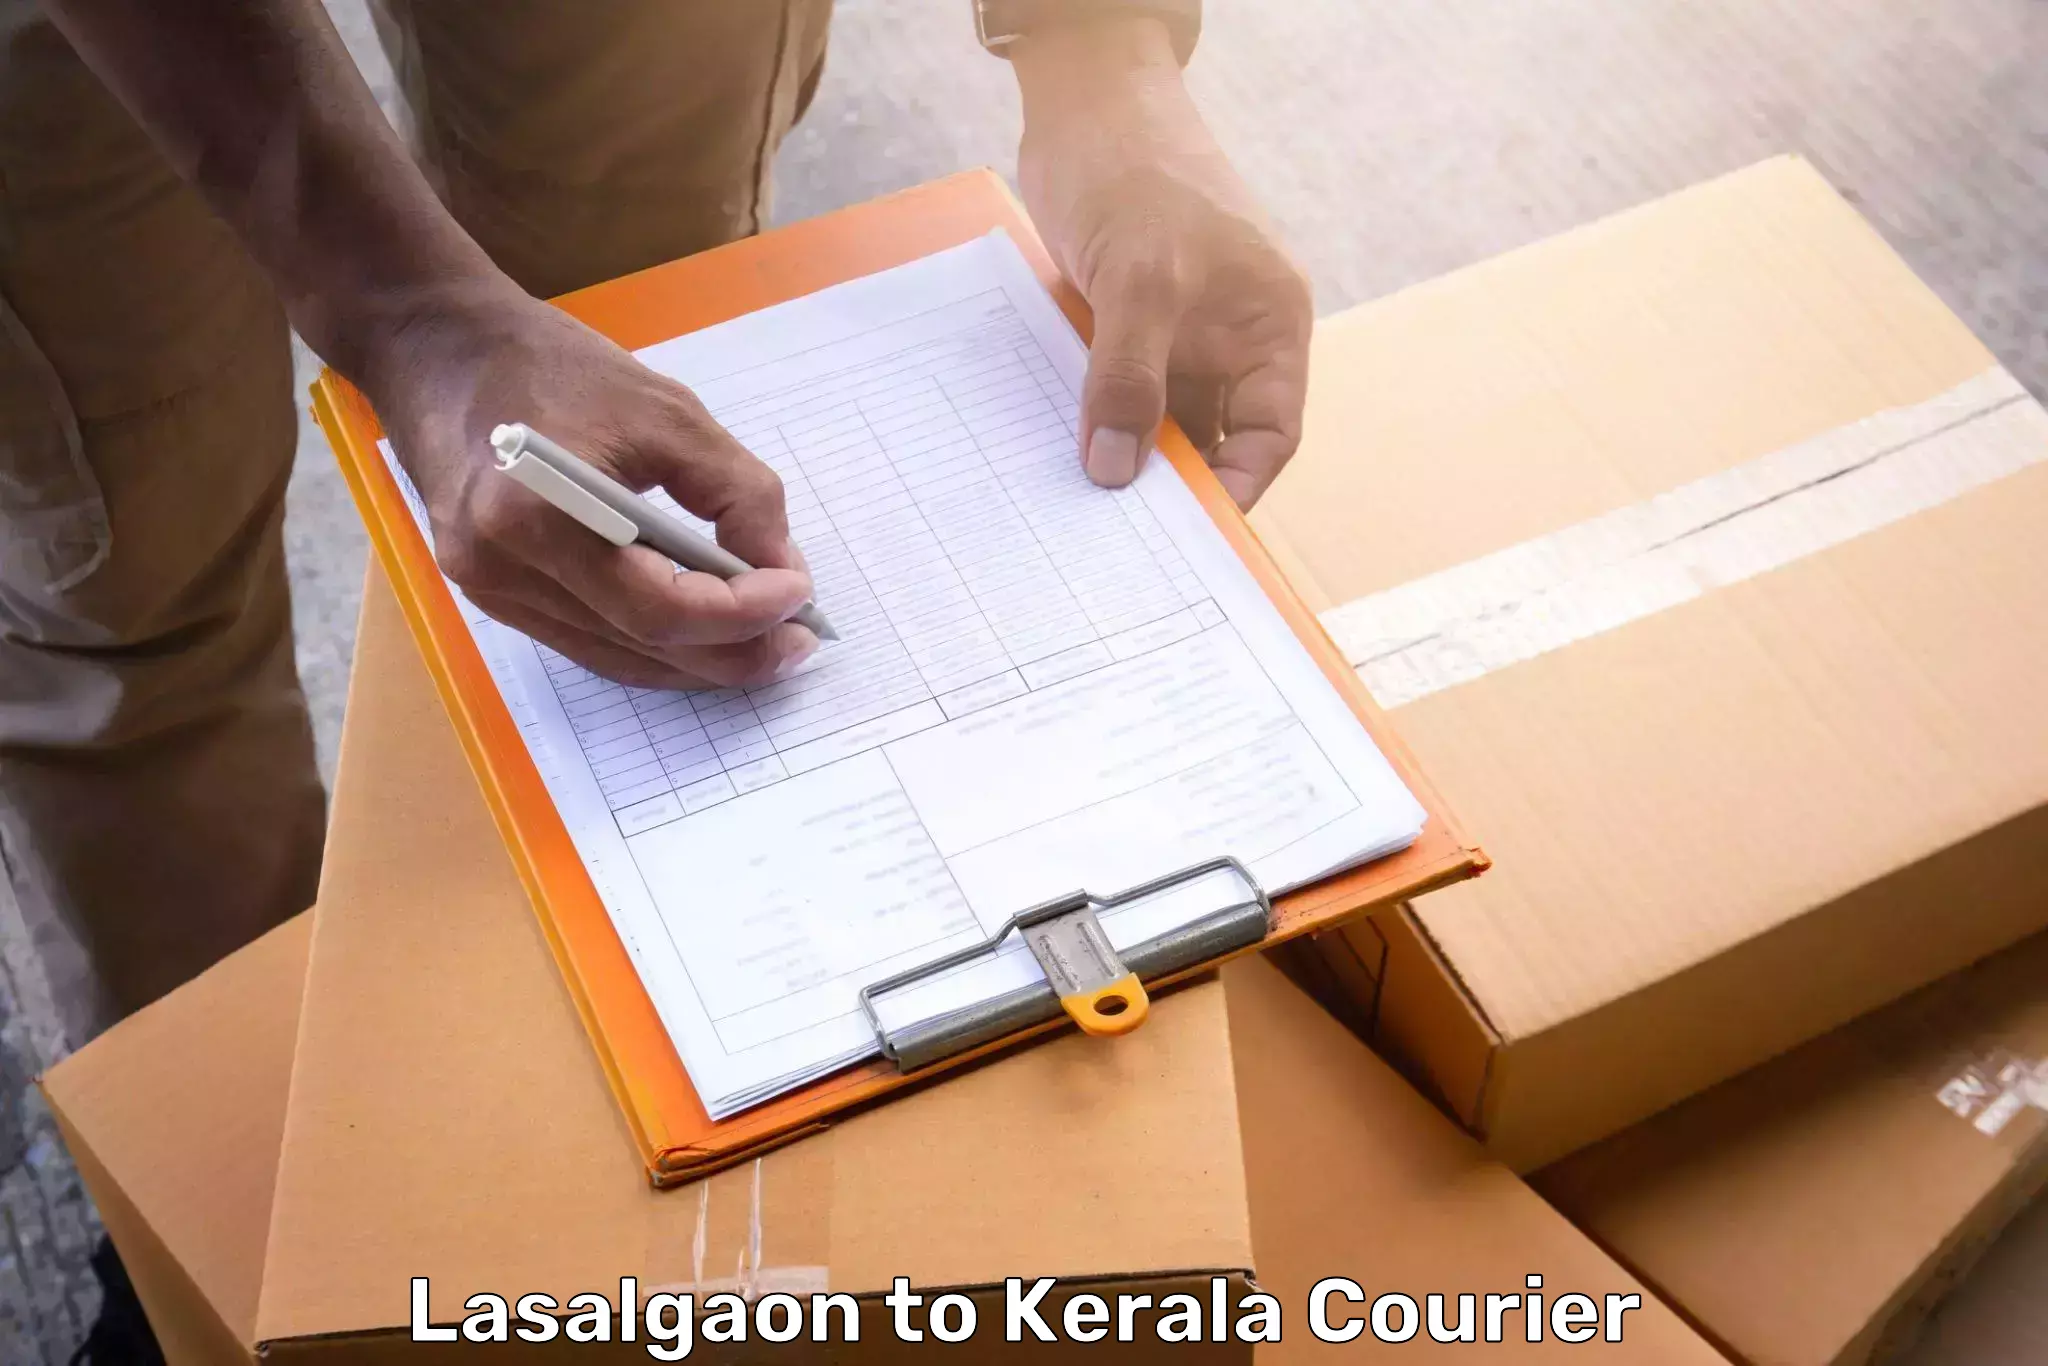 Luggage delivery estimate Lasalgaon to Cochin University of Science and Technology